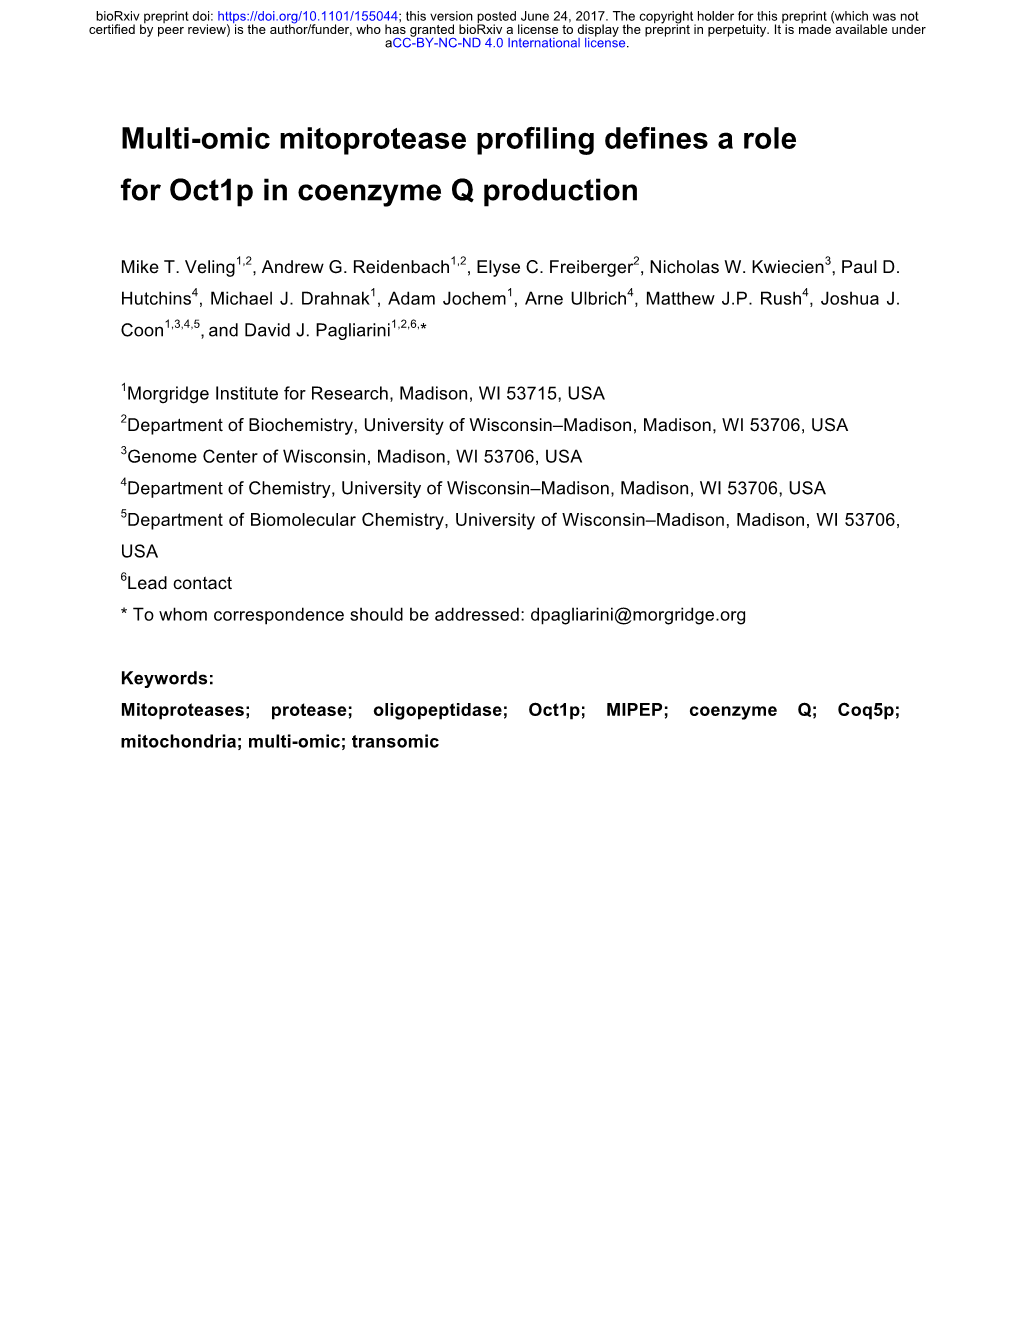 Multi-Omic Mitoprotease Profiling Defines a Role for Oct1p in Coenzyme Q Production